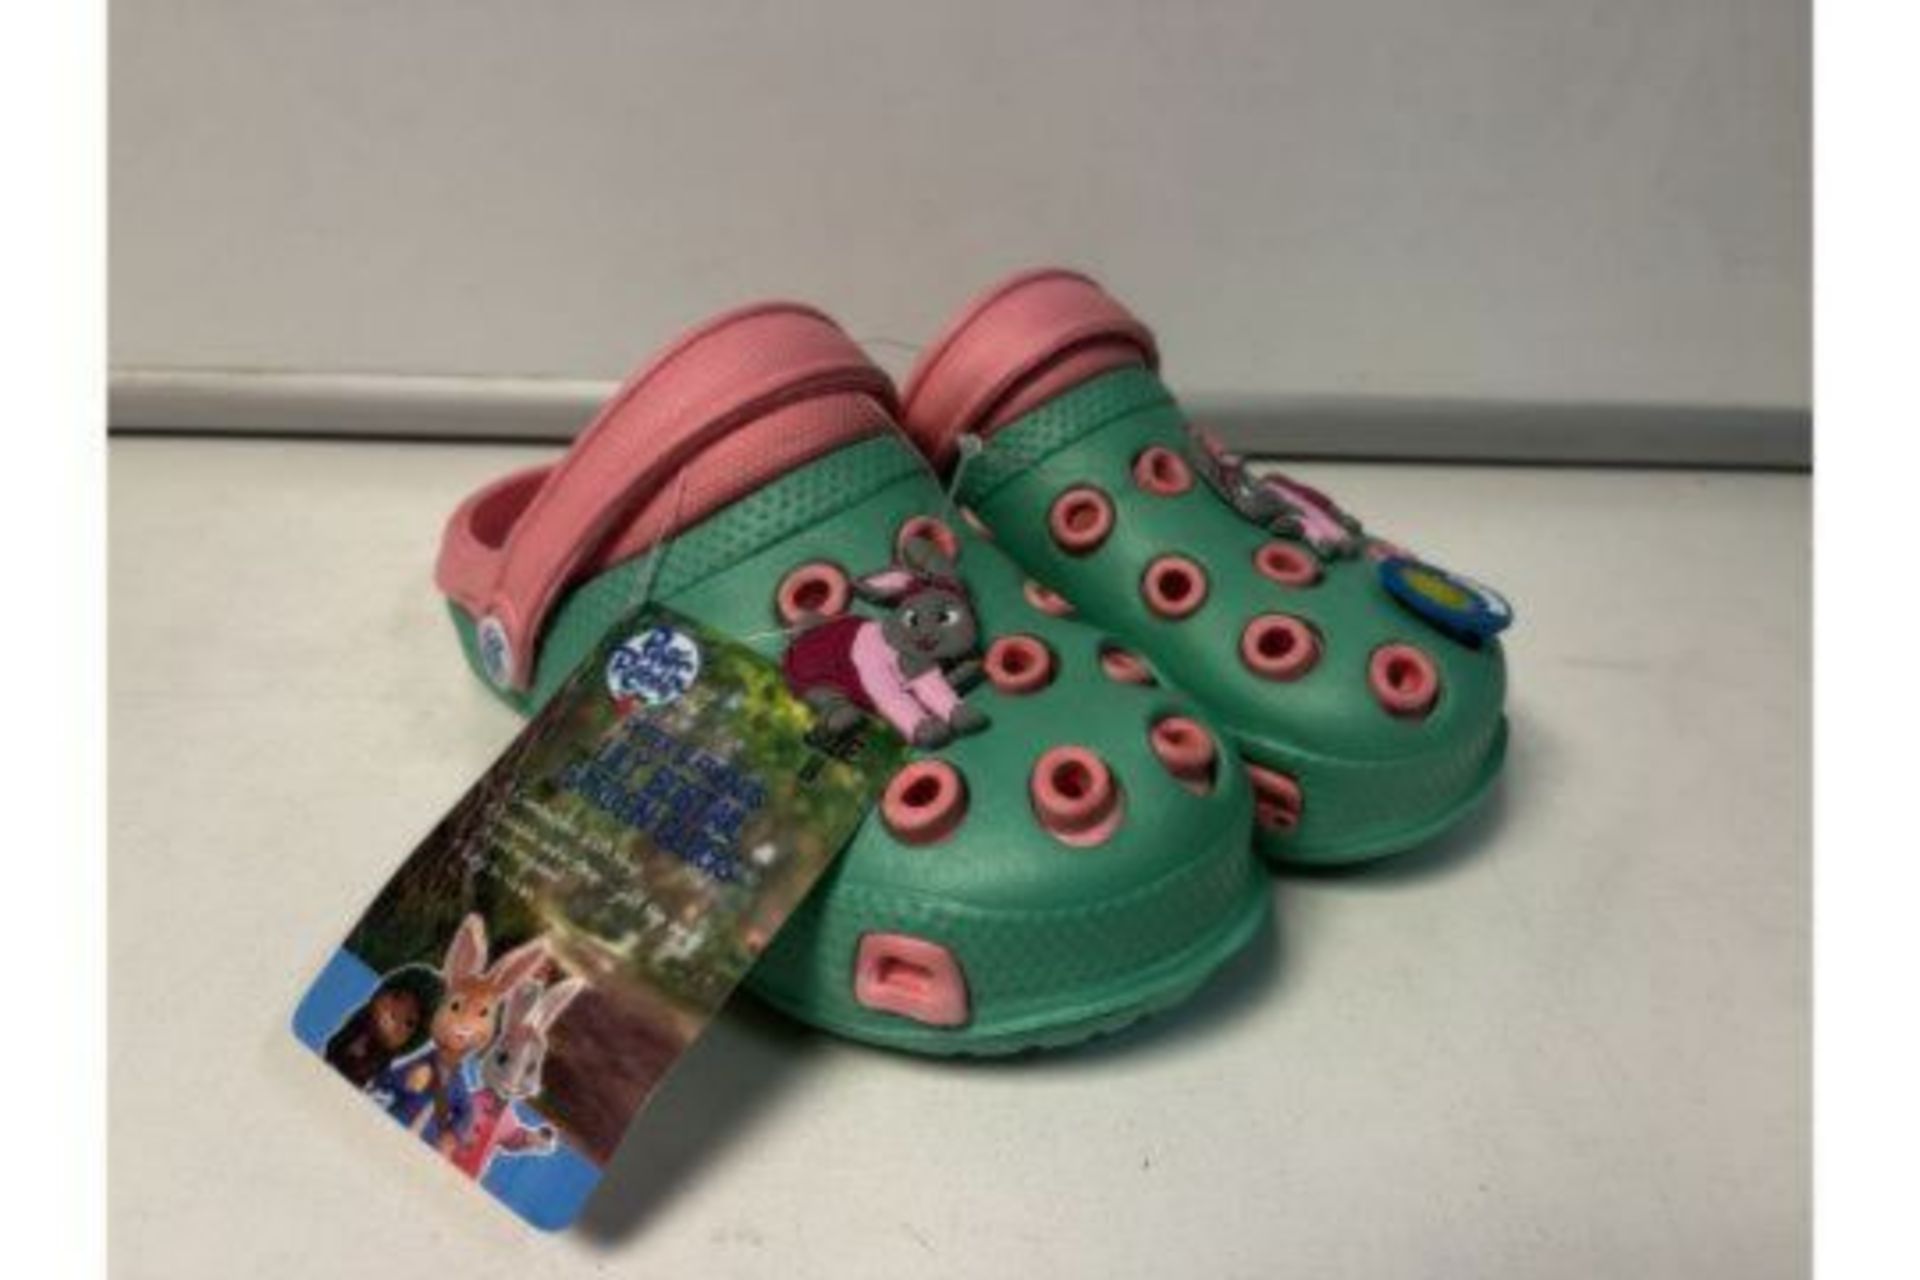 18 X NEW PAIRS OF PETER RABBIT & FRIENDS LILY BOBTAIL GARDEN CLOG CHILDRENS SHOES. SIZES MAY